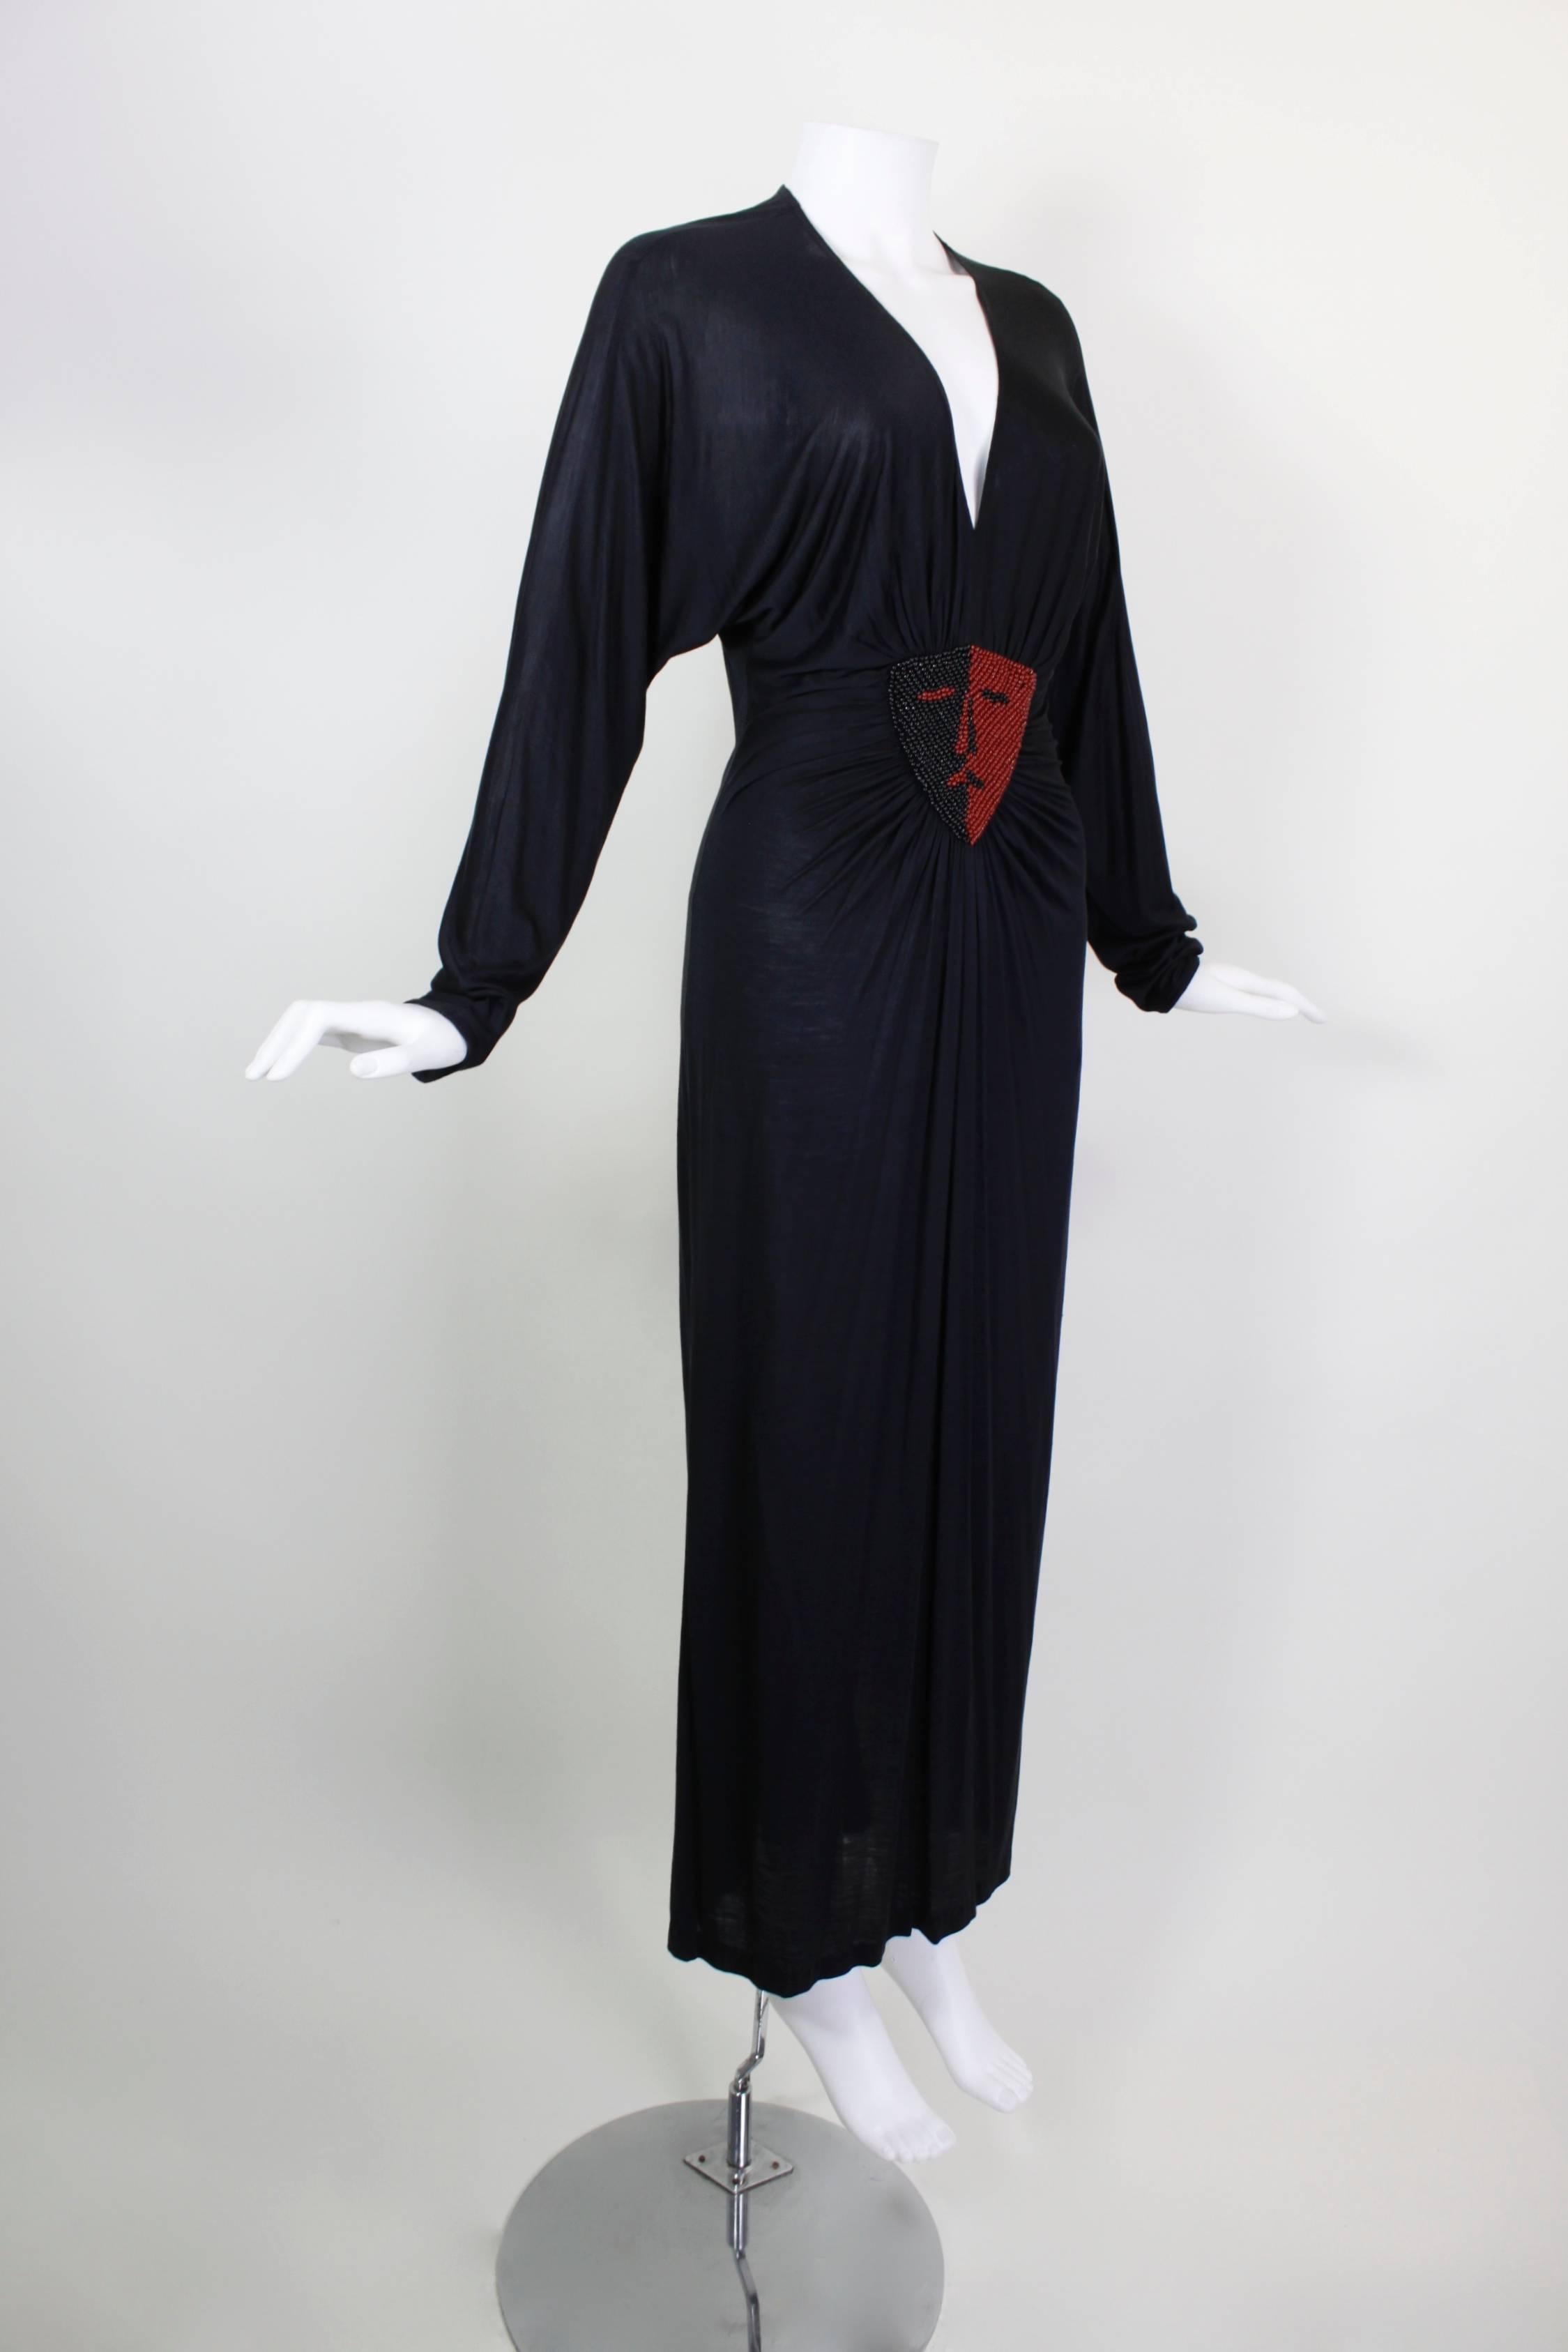 Black Vintage Callaghan Jersey Dress with Dual Beaded Portrait Motif